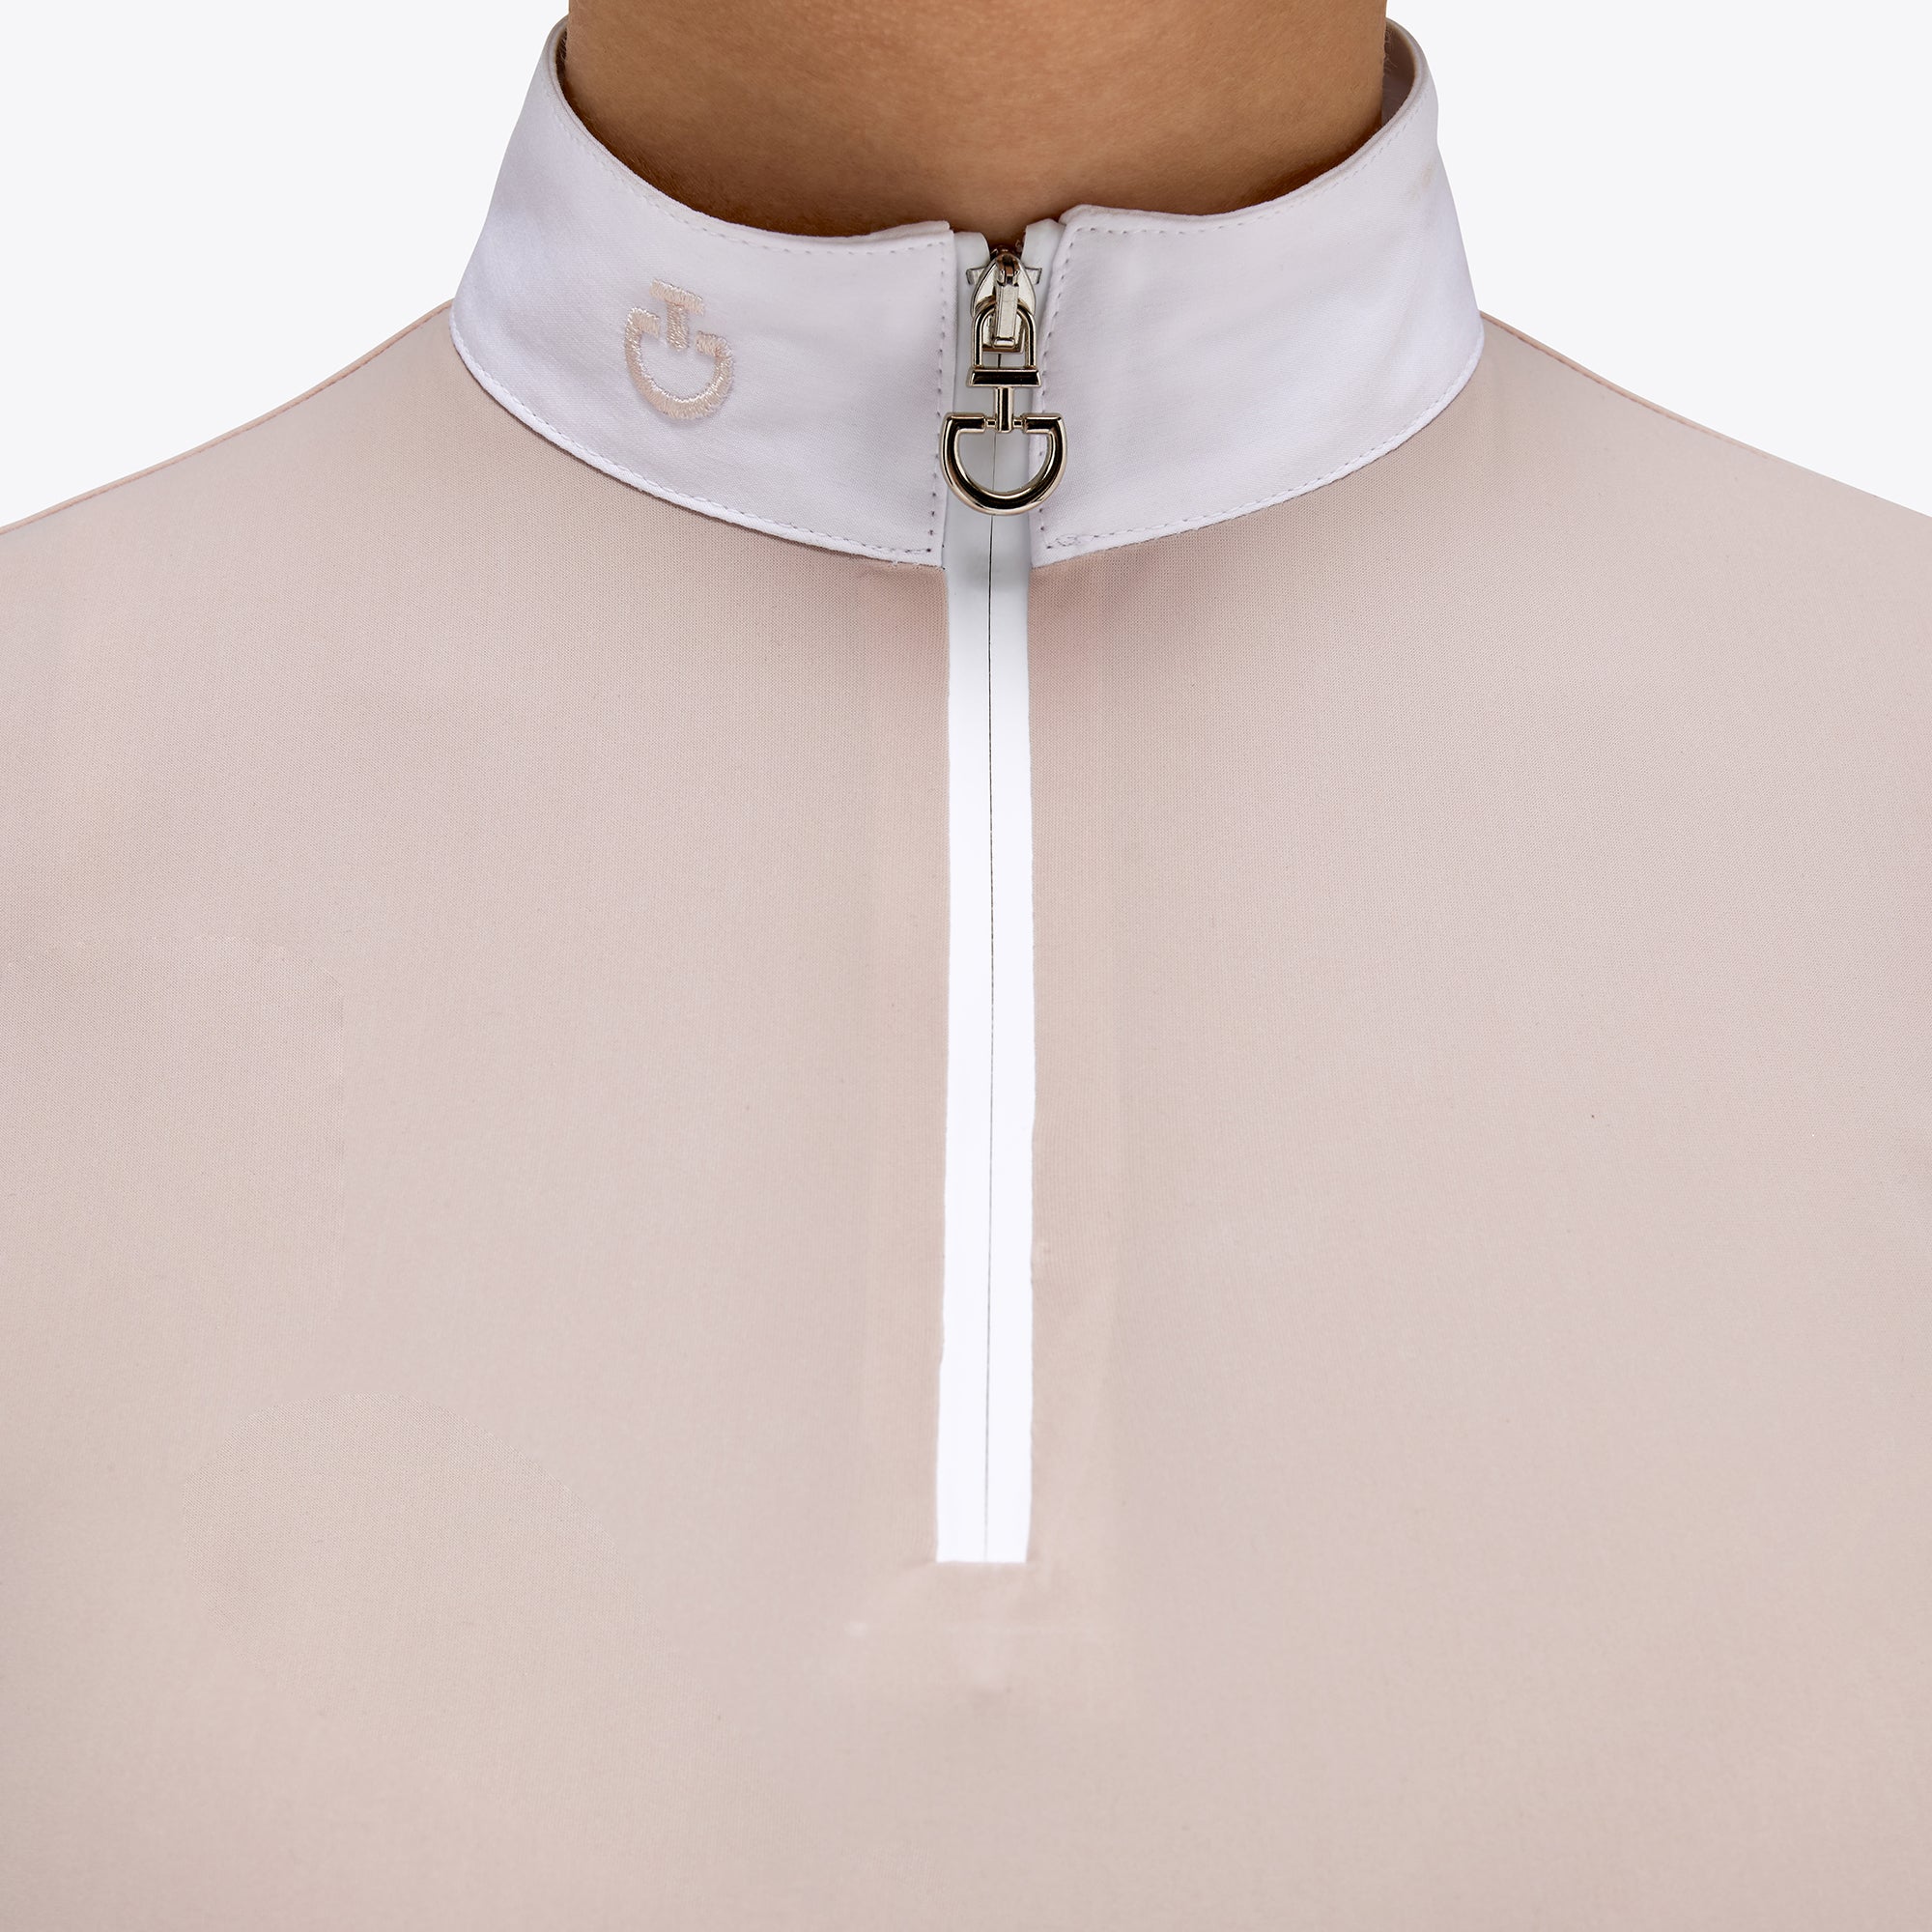 Champion's Choice - The ultimate zip-up shirt for girls 